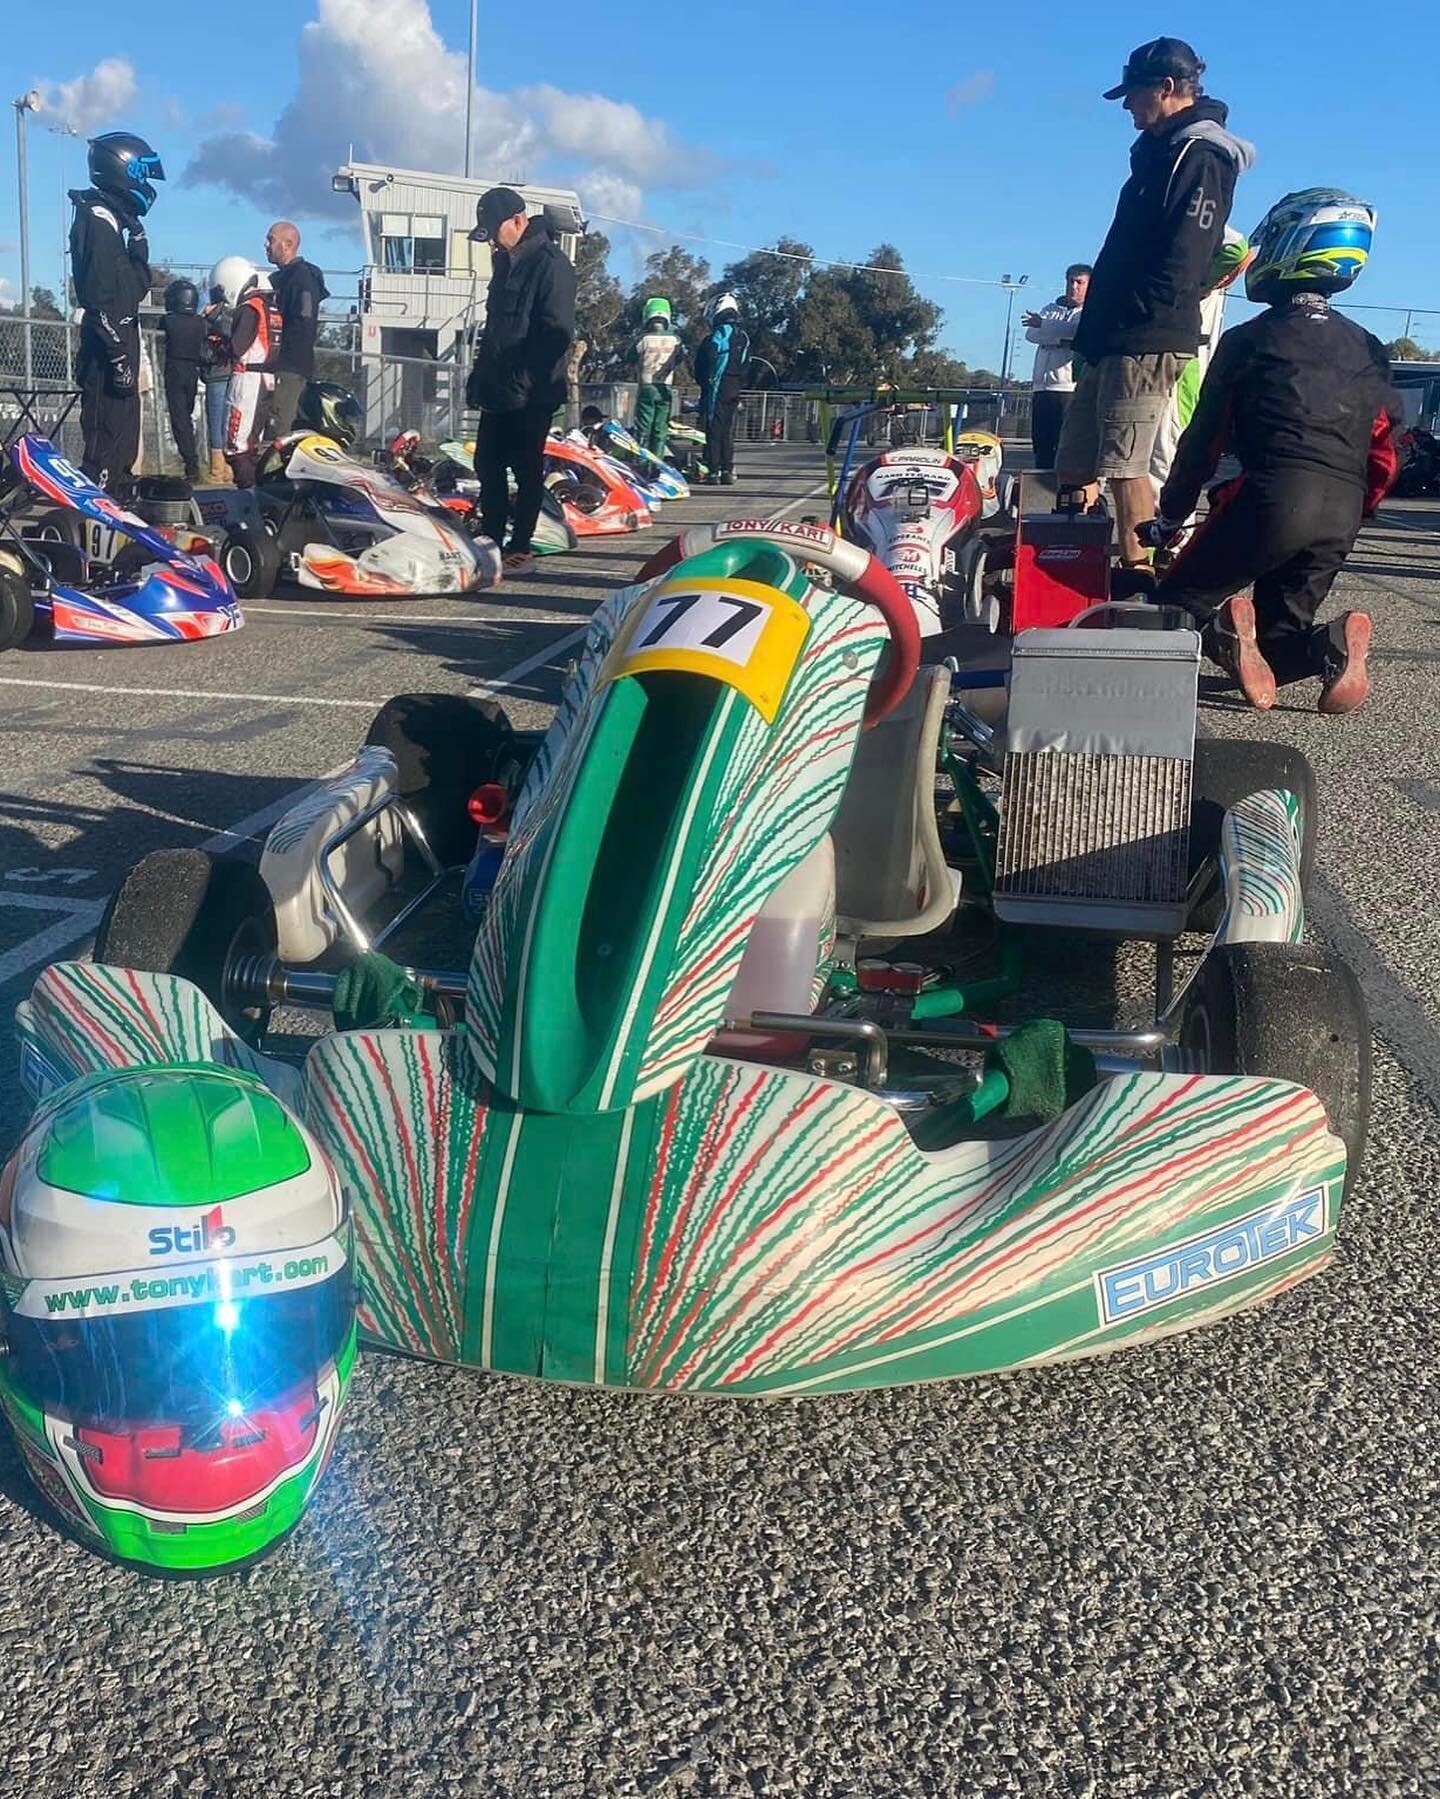 @_chase_77_ and @hmcg_racing were on fine form today in their Tony Kart 401RRs. Purple lap times in KA2, KA3 and TAG Light, couple of wins for Hugh McGuire and joint on points for the win for Chase Wildman in KA2.

Some other solid performances were 